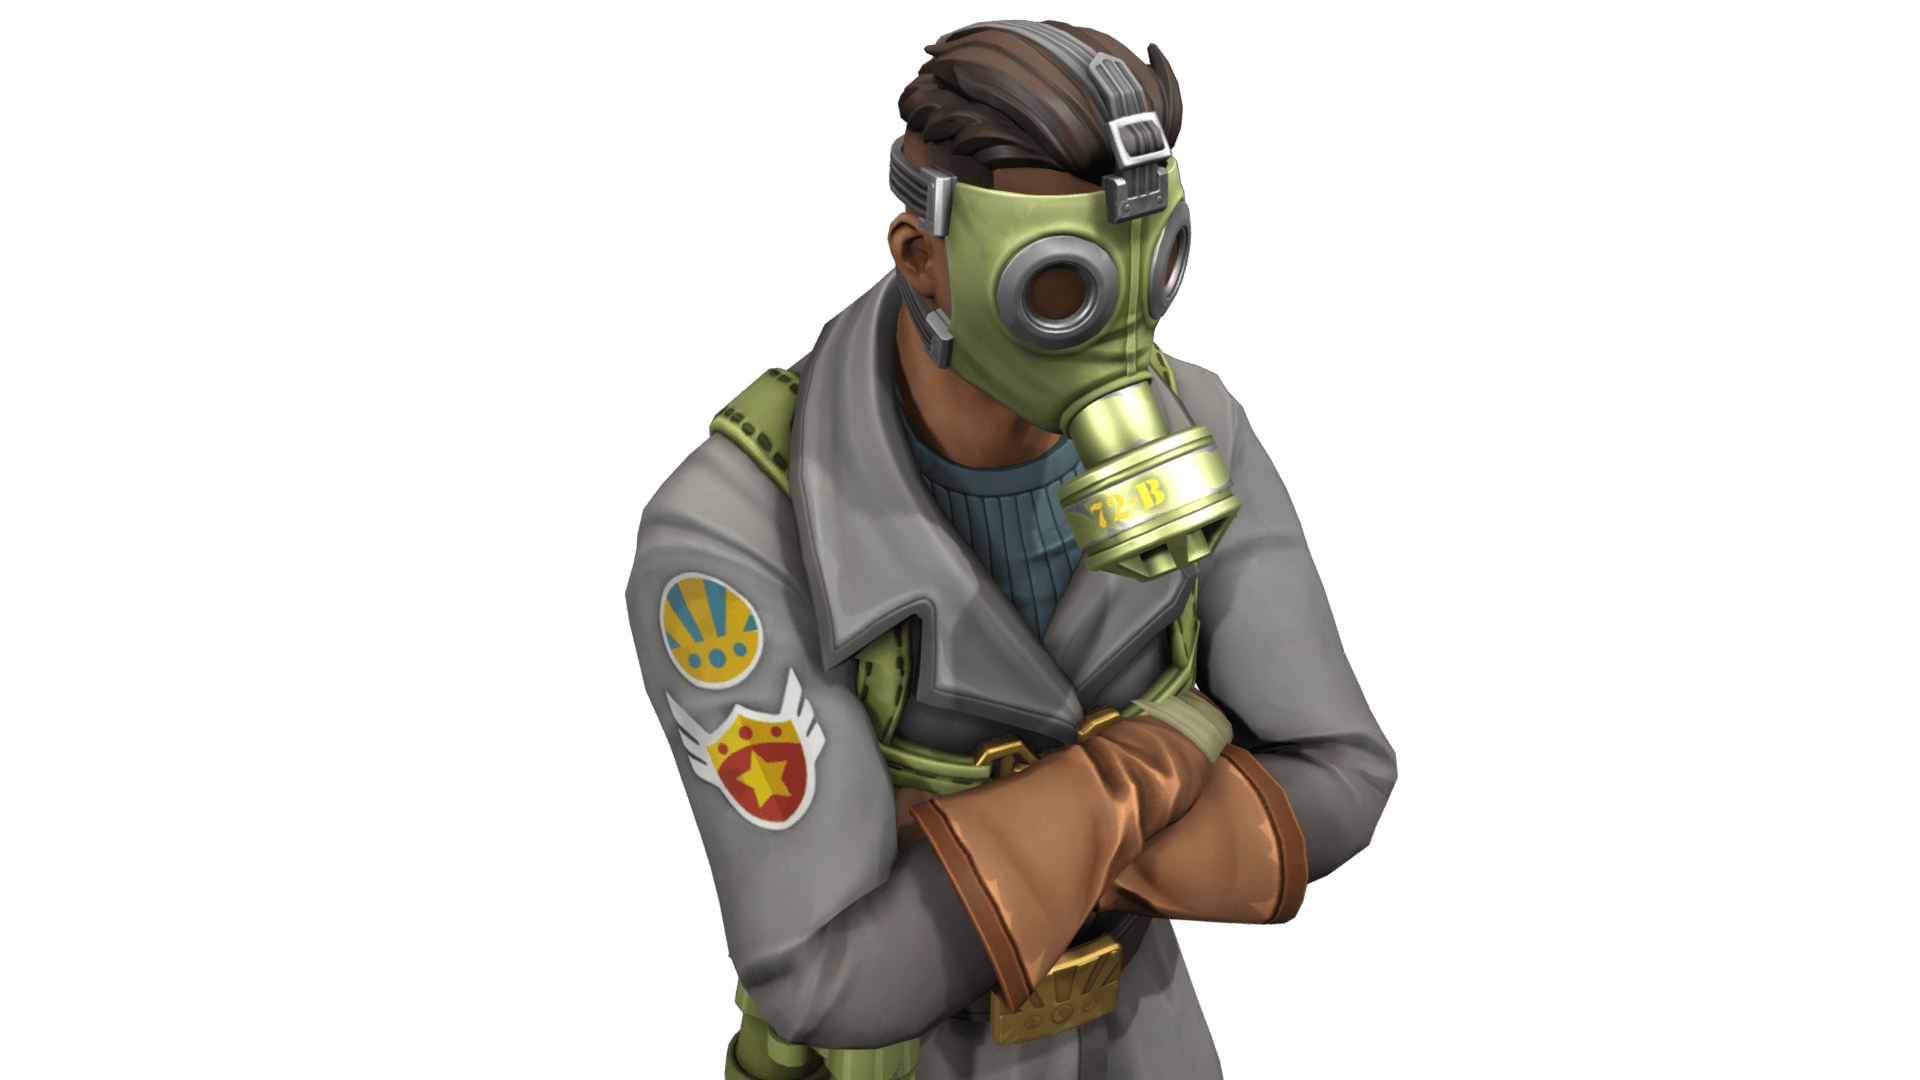 S.T.A.L.K.E.R. Game Character PNG Image